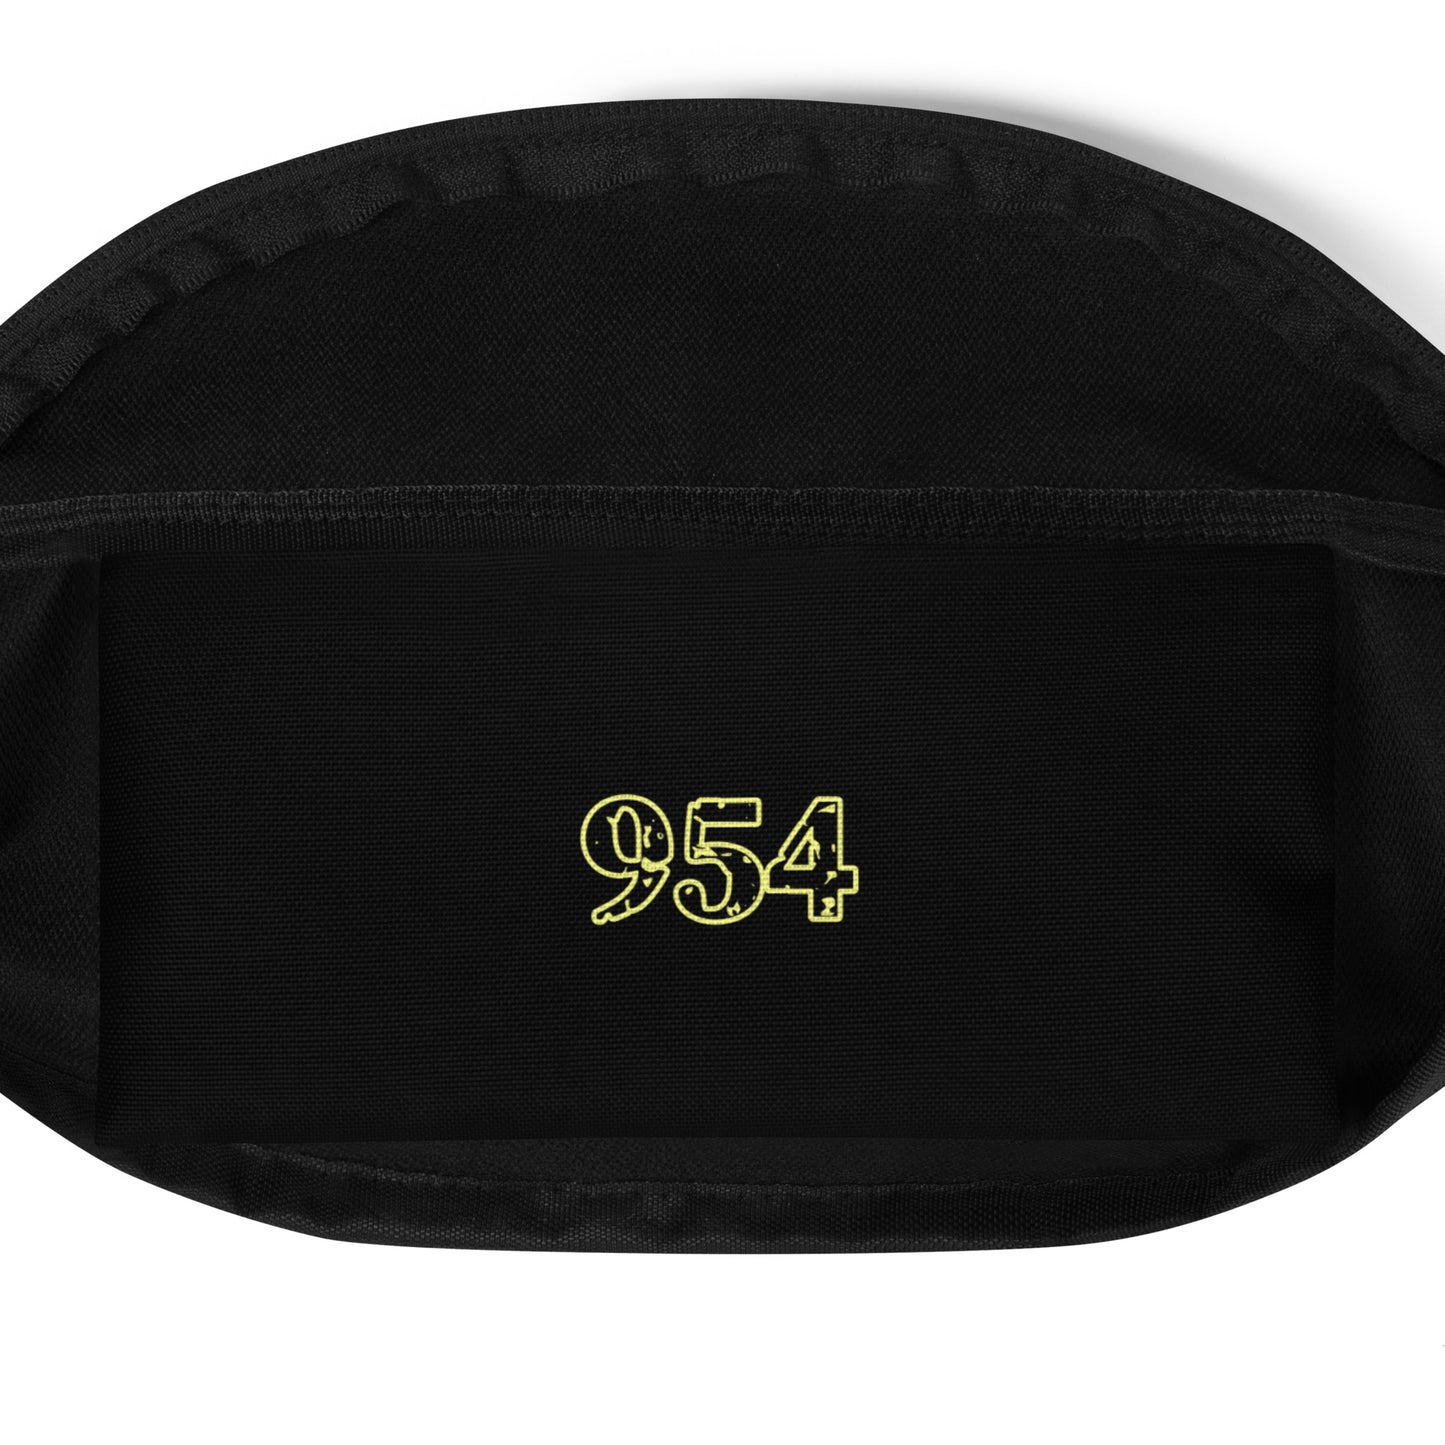 Soccer Life 954 Signature Fanny Pack